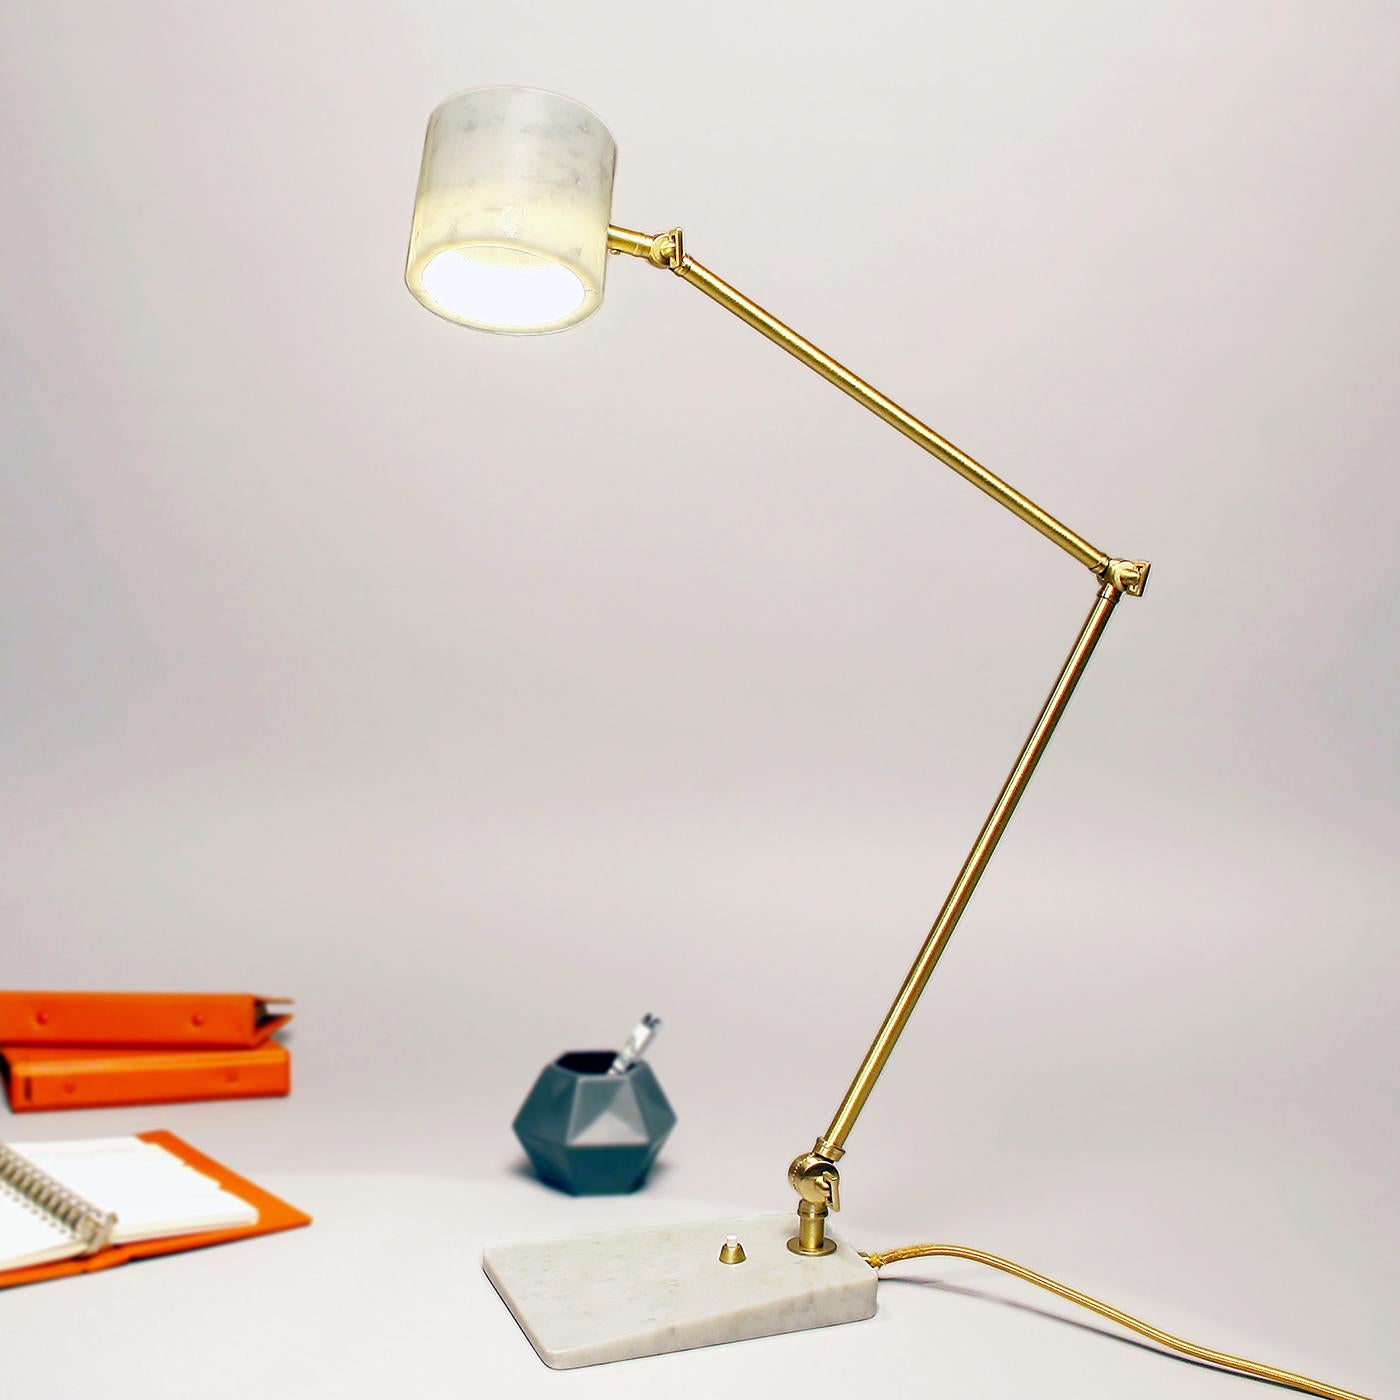 The Flamingo desk lamp is characterized by the contrast between the volumes of its elements: the thinness of the adjustable angle brass arm contrasts with the unusual adjustable marble shade.